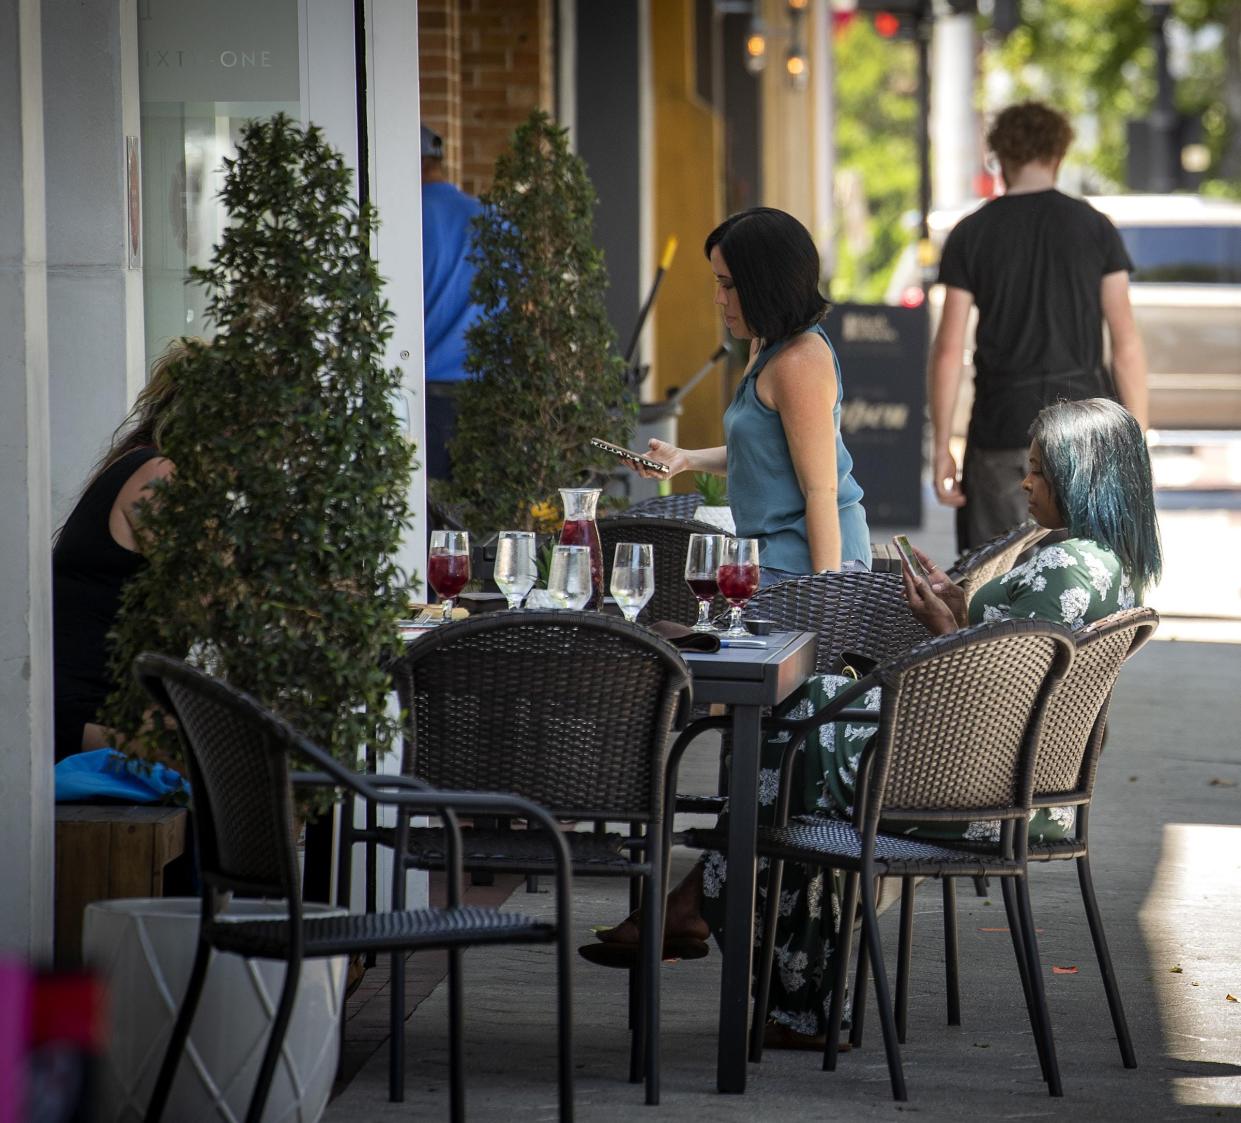 Downtown lunch goers enjoy a meal outside the Nineteen61 restaurant in Lakeland.